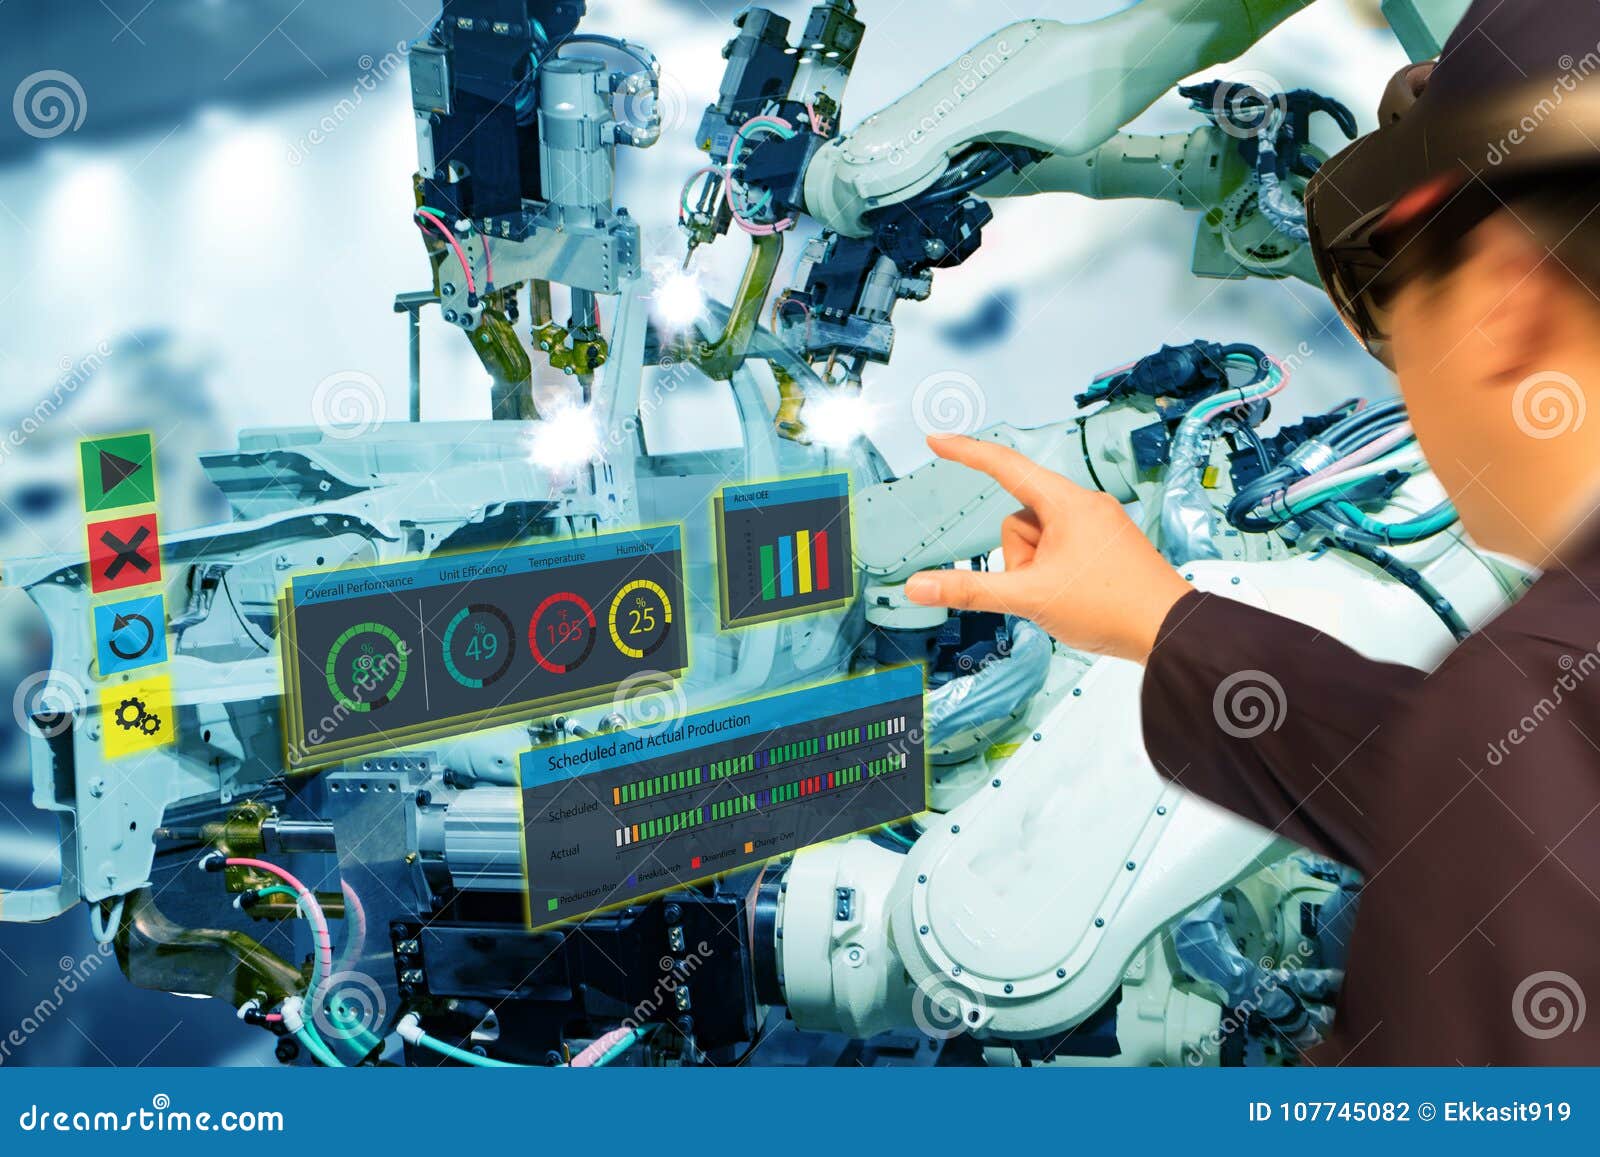 iot industry 4.0 concept,industrial engineerblurred using smart glasses with augmented mixed with virtual reality technology to